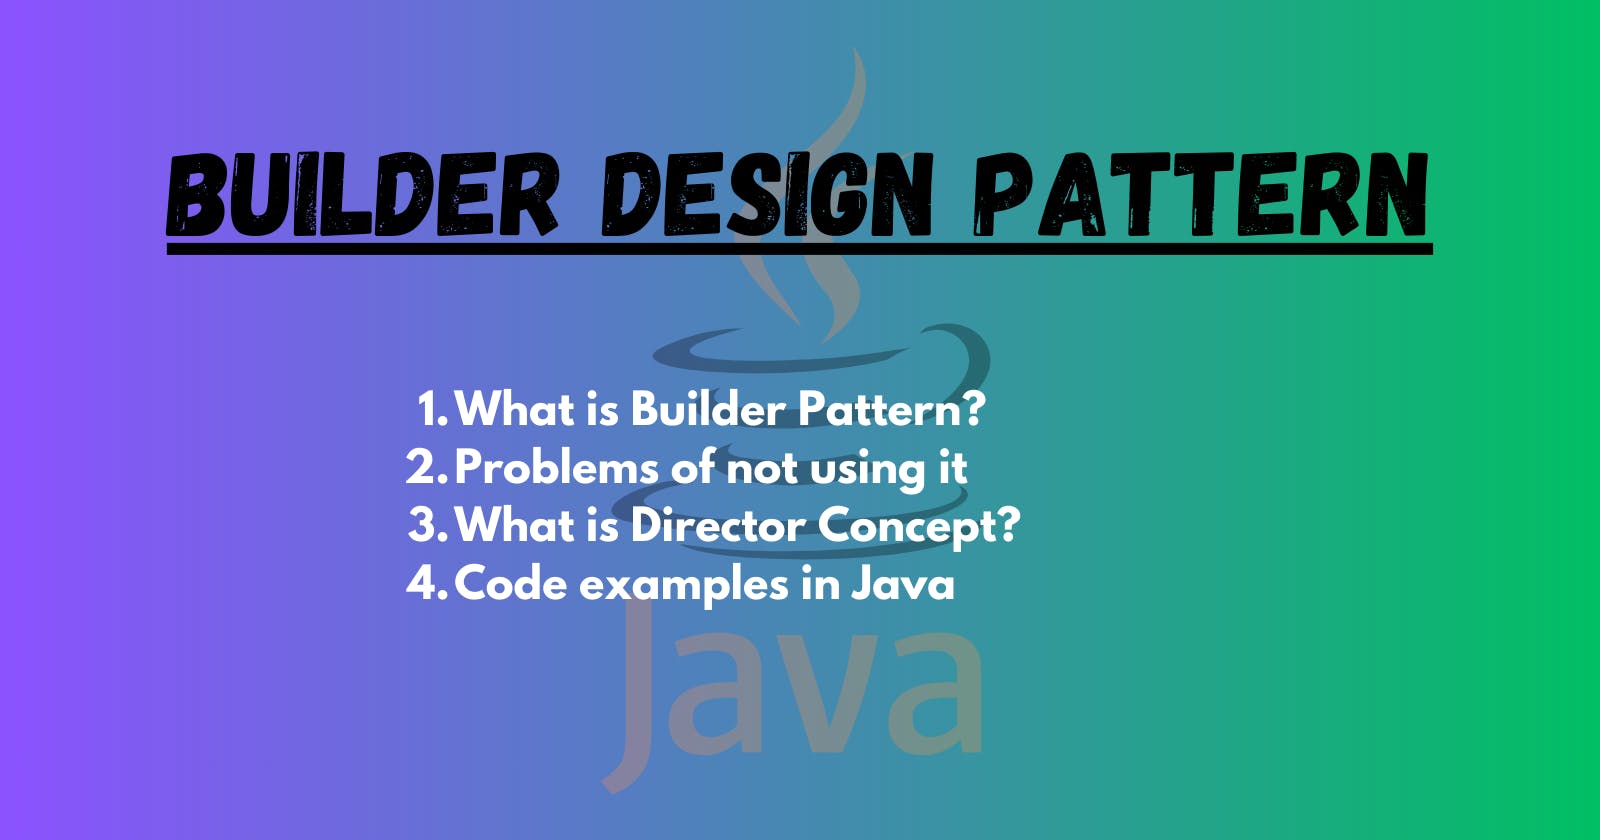 Creating Java Objects Like a Pro: Mastering the Builder Design Pattern